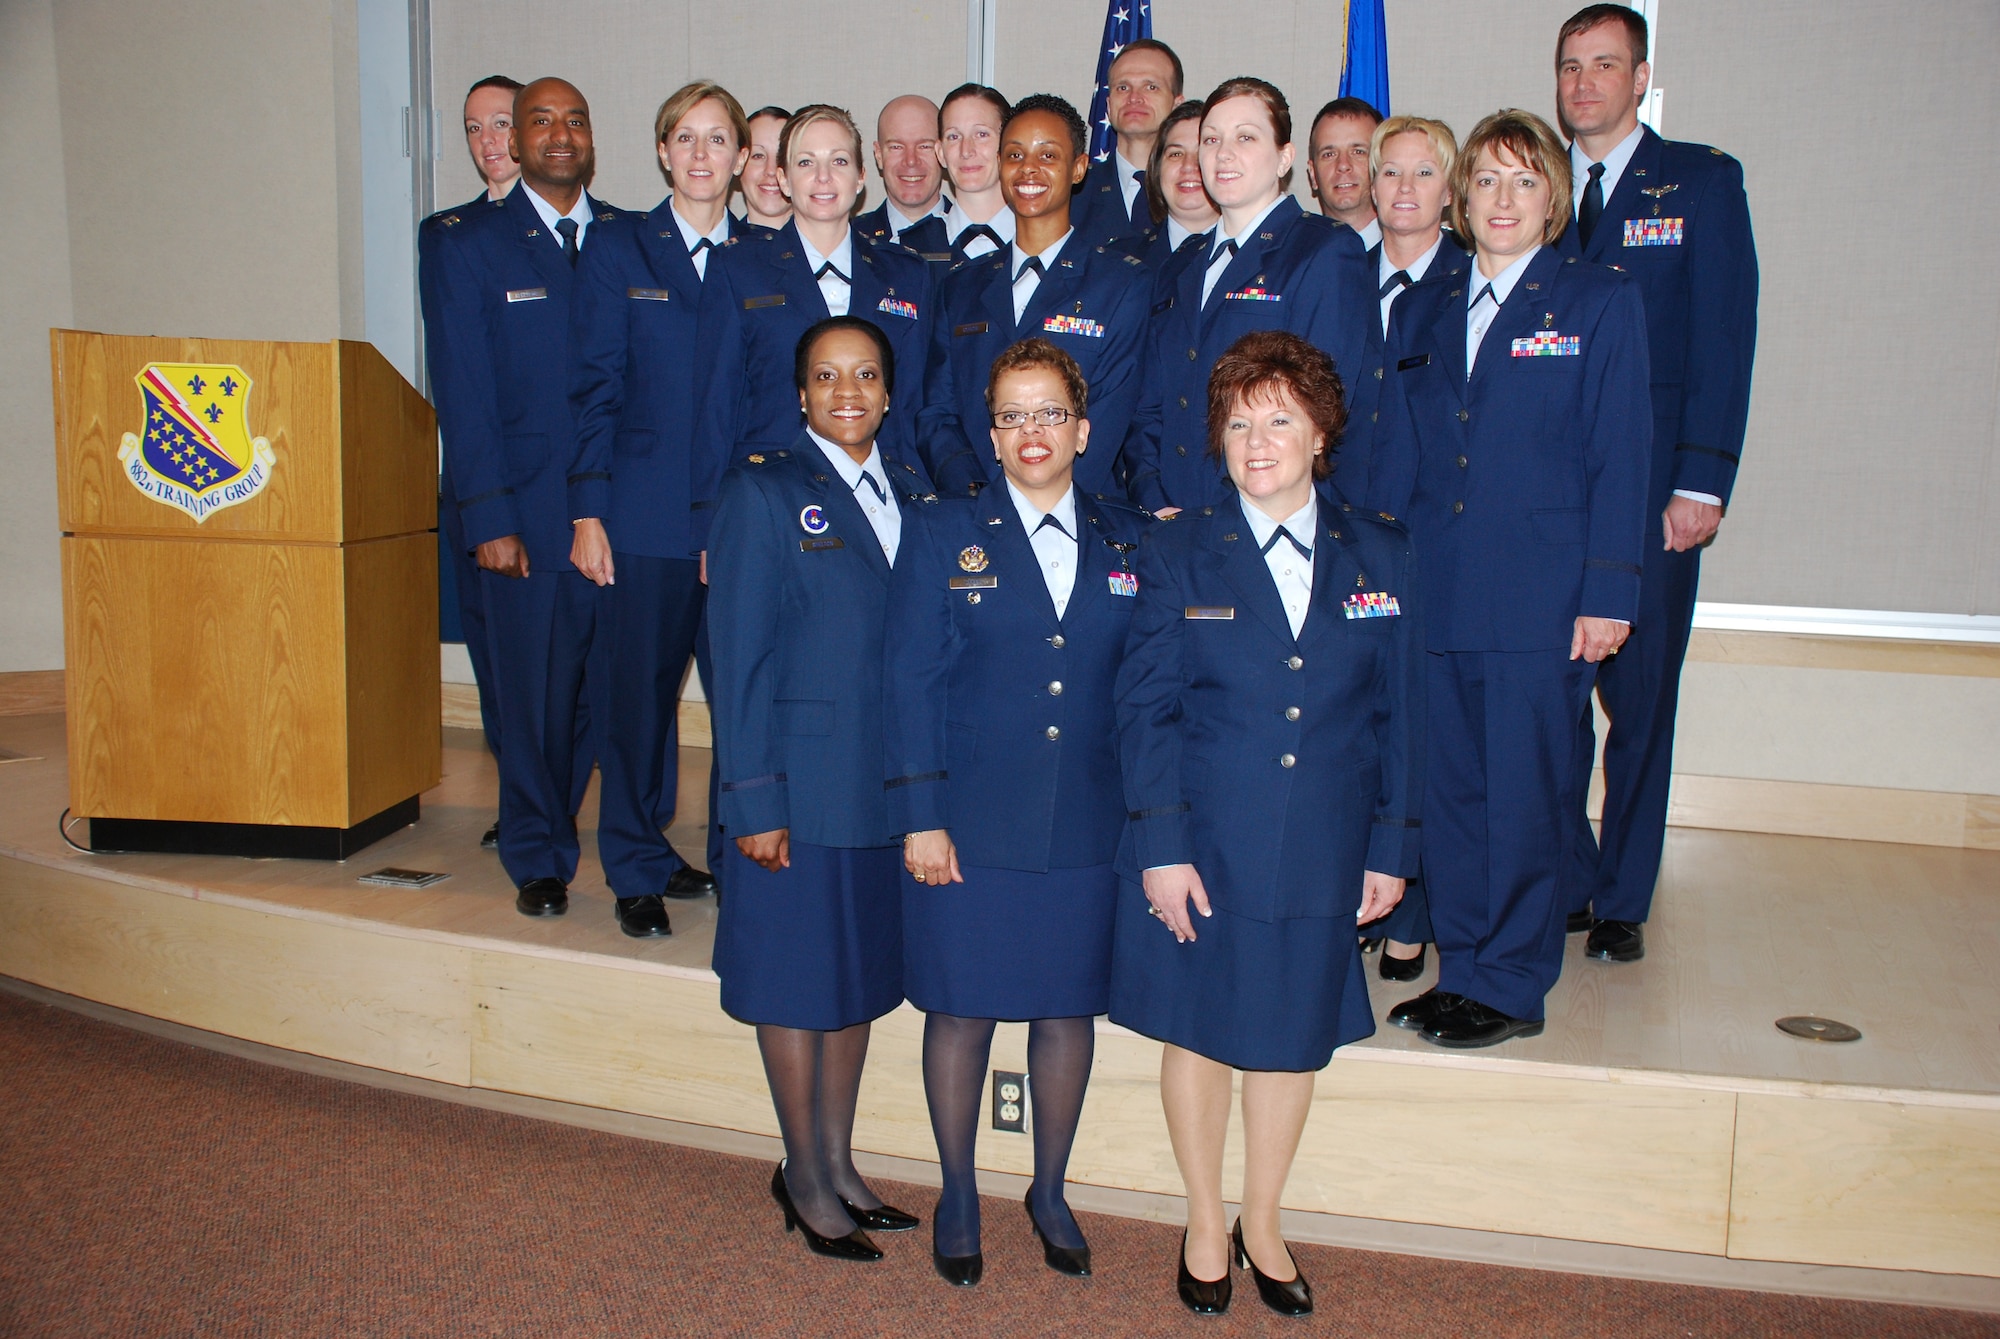 Col. Donnalee Sykes (front center), chief of the Education and Training Division and director of the Air Force Nursing Services at Headquarters Air Force, Office of the Surgeon General, poses with the Nursing Service Management graduating class and course supervisors at the Bldg. 1900 small auditorium March 30. Colonel Sykes was the first officer of such high position to officiate an 882 Training Group NSM graduation at Sheppard Air Force Base, Texas. (U.S. Air Force photo/Airman 1st Class Valerie Hosea)